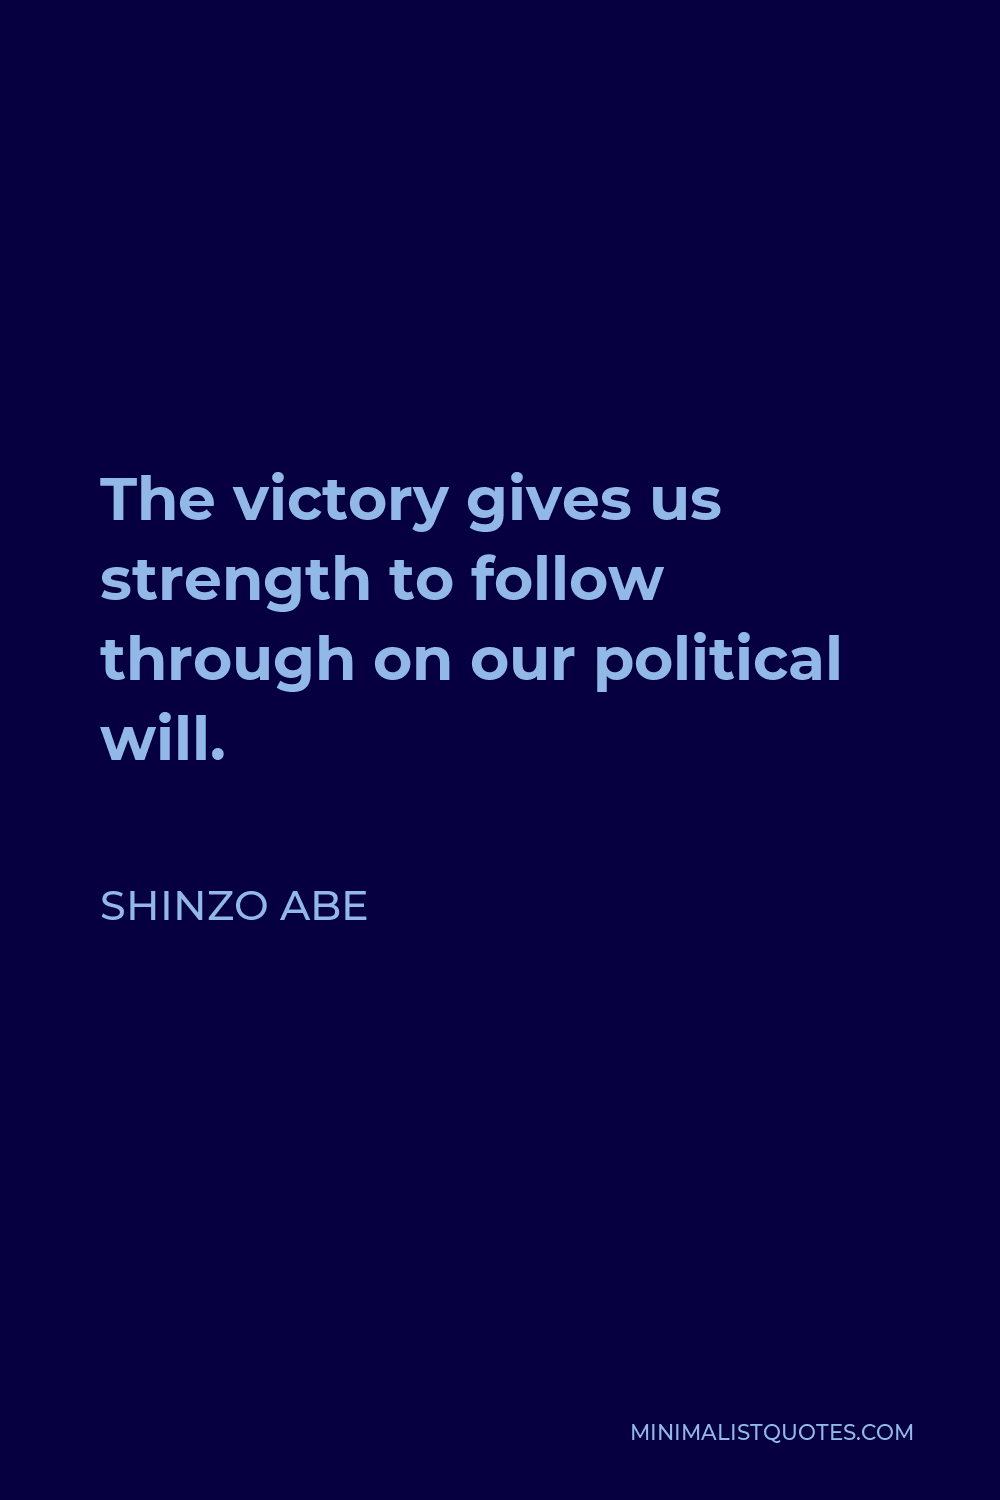 Shinzo Abe Quote - The victory gives us strength to follow through on our political will.